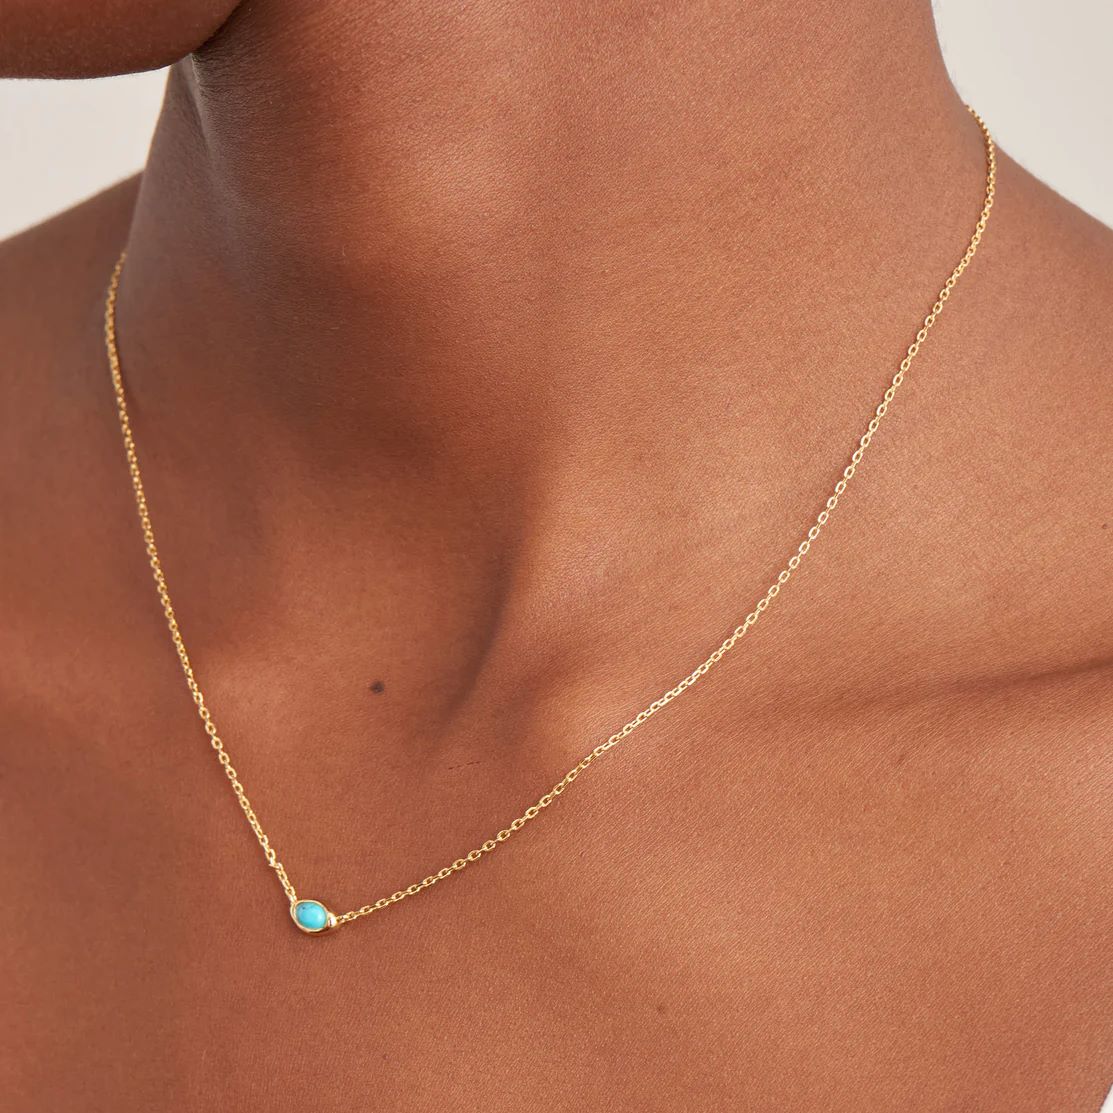 Ania Haie Turquoise Wave Necklace - Gold